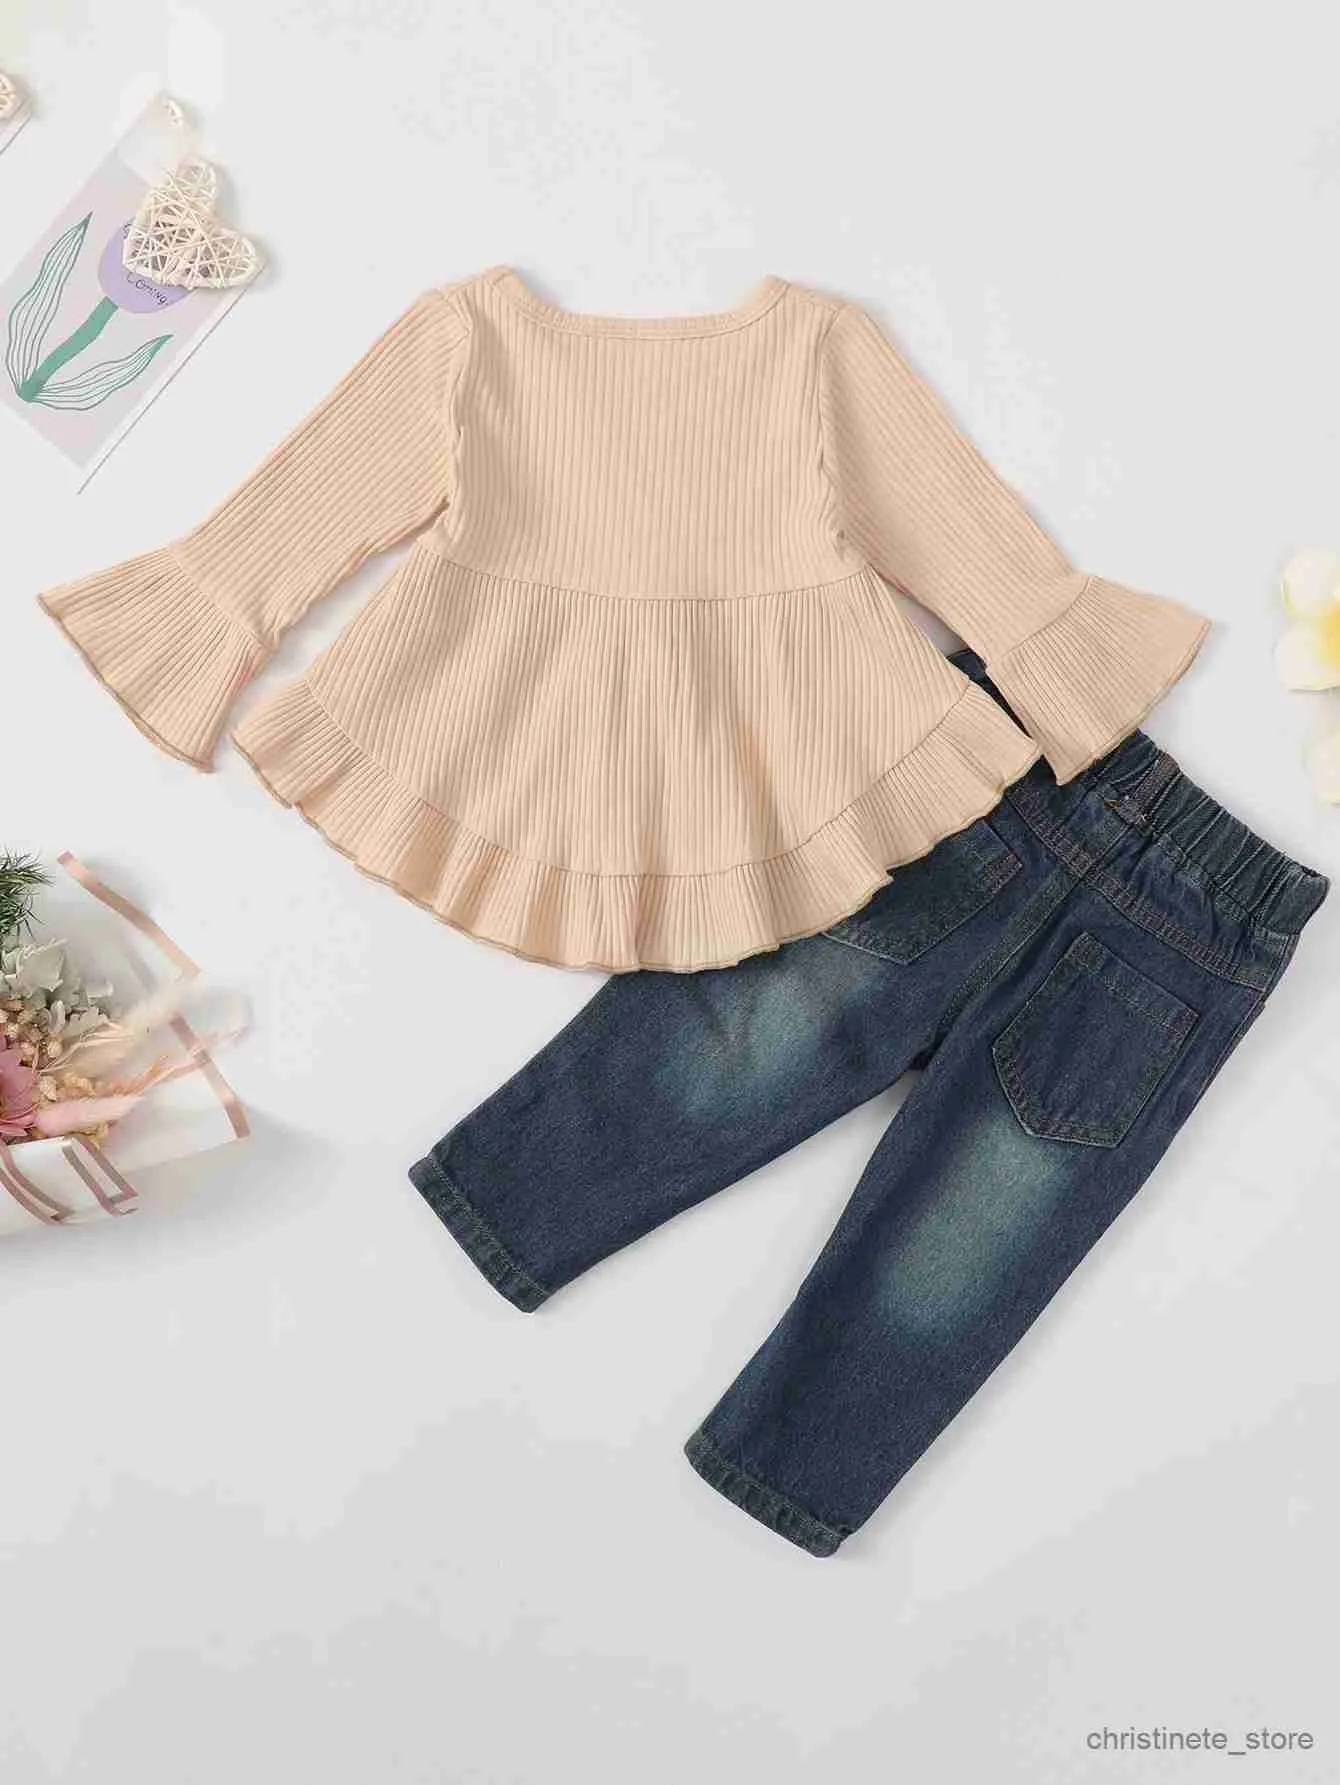 Clothing Sets Baby Girl's 2pcs Ribbed Long Sleeve Top Ripped Denim Jeans Set Ruffle Decor Casual Outfits Toddler Kids Clothes For Spring R231127